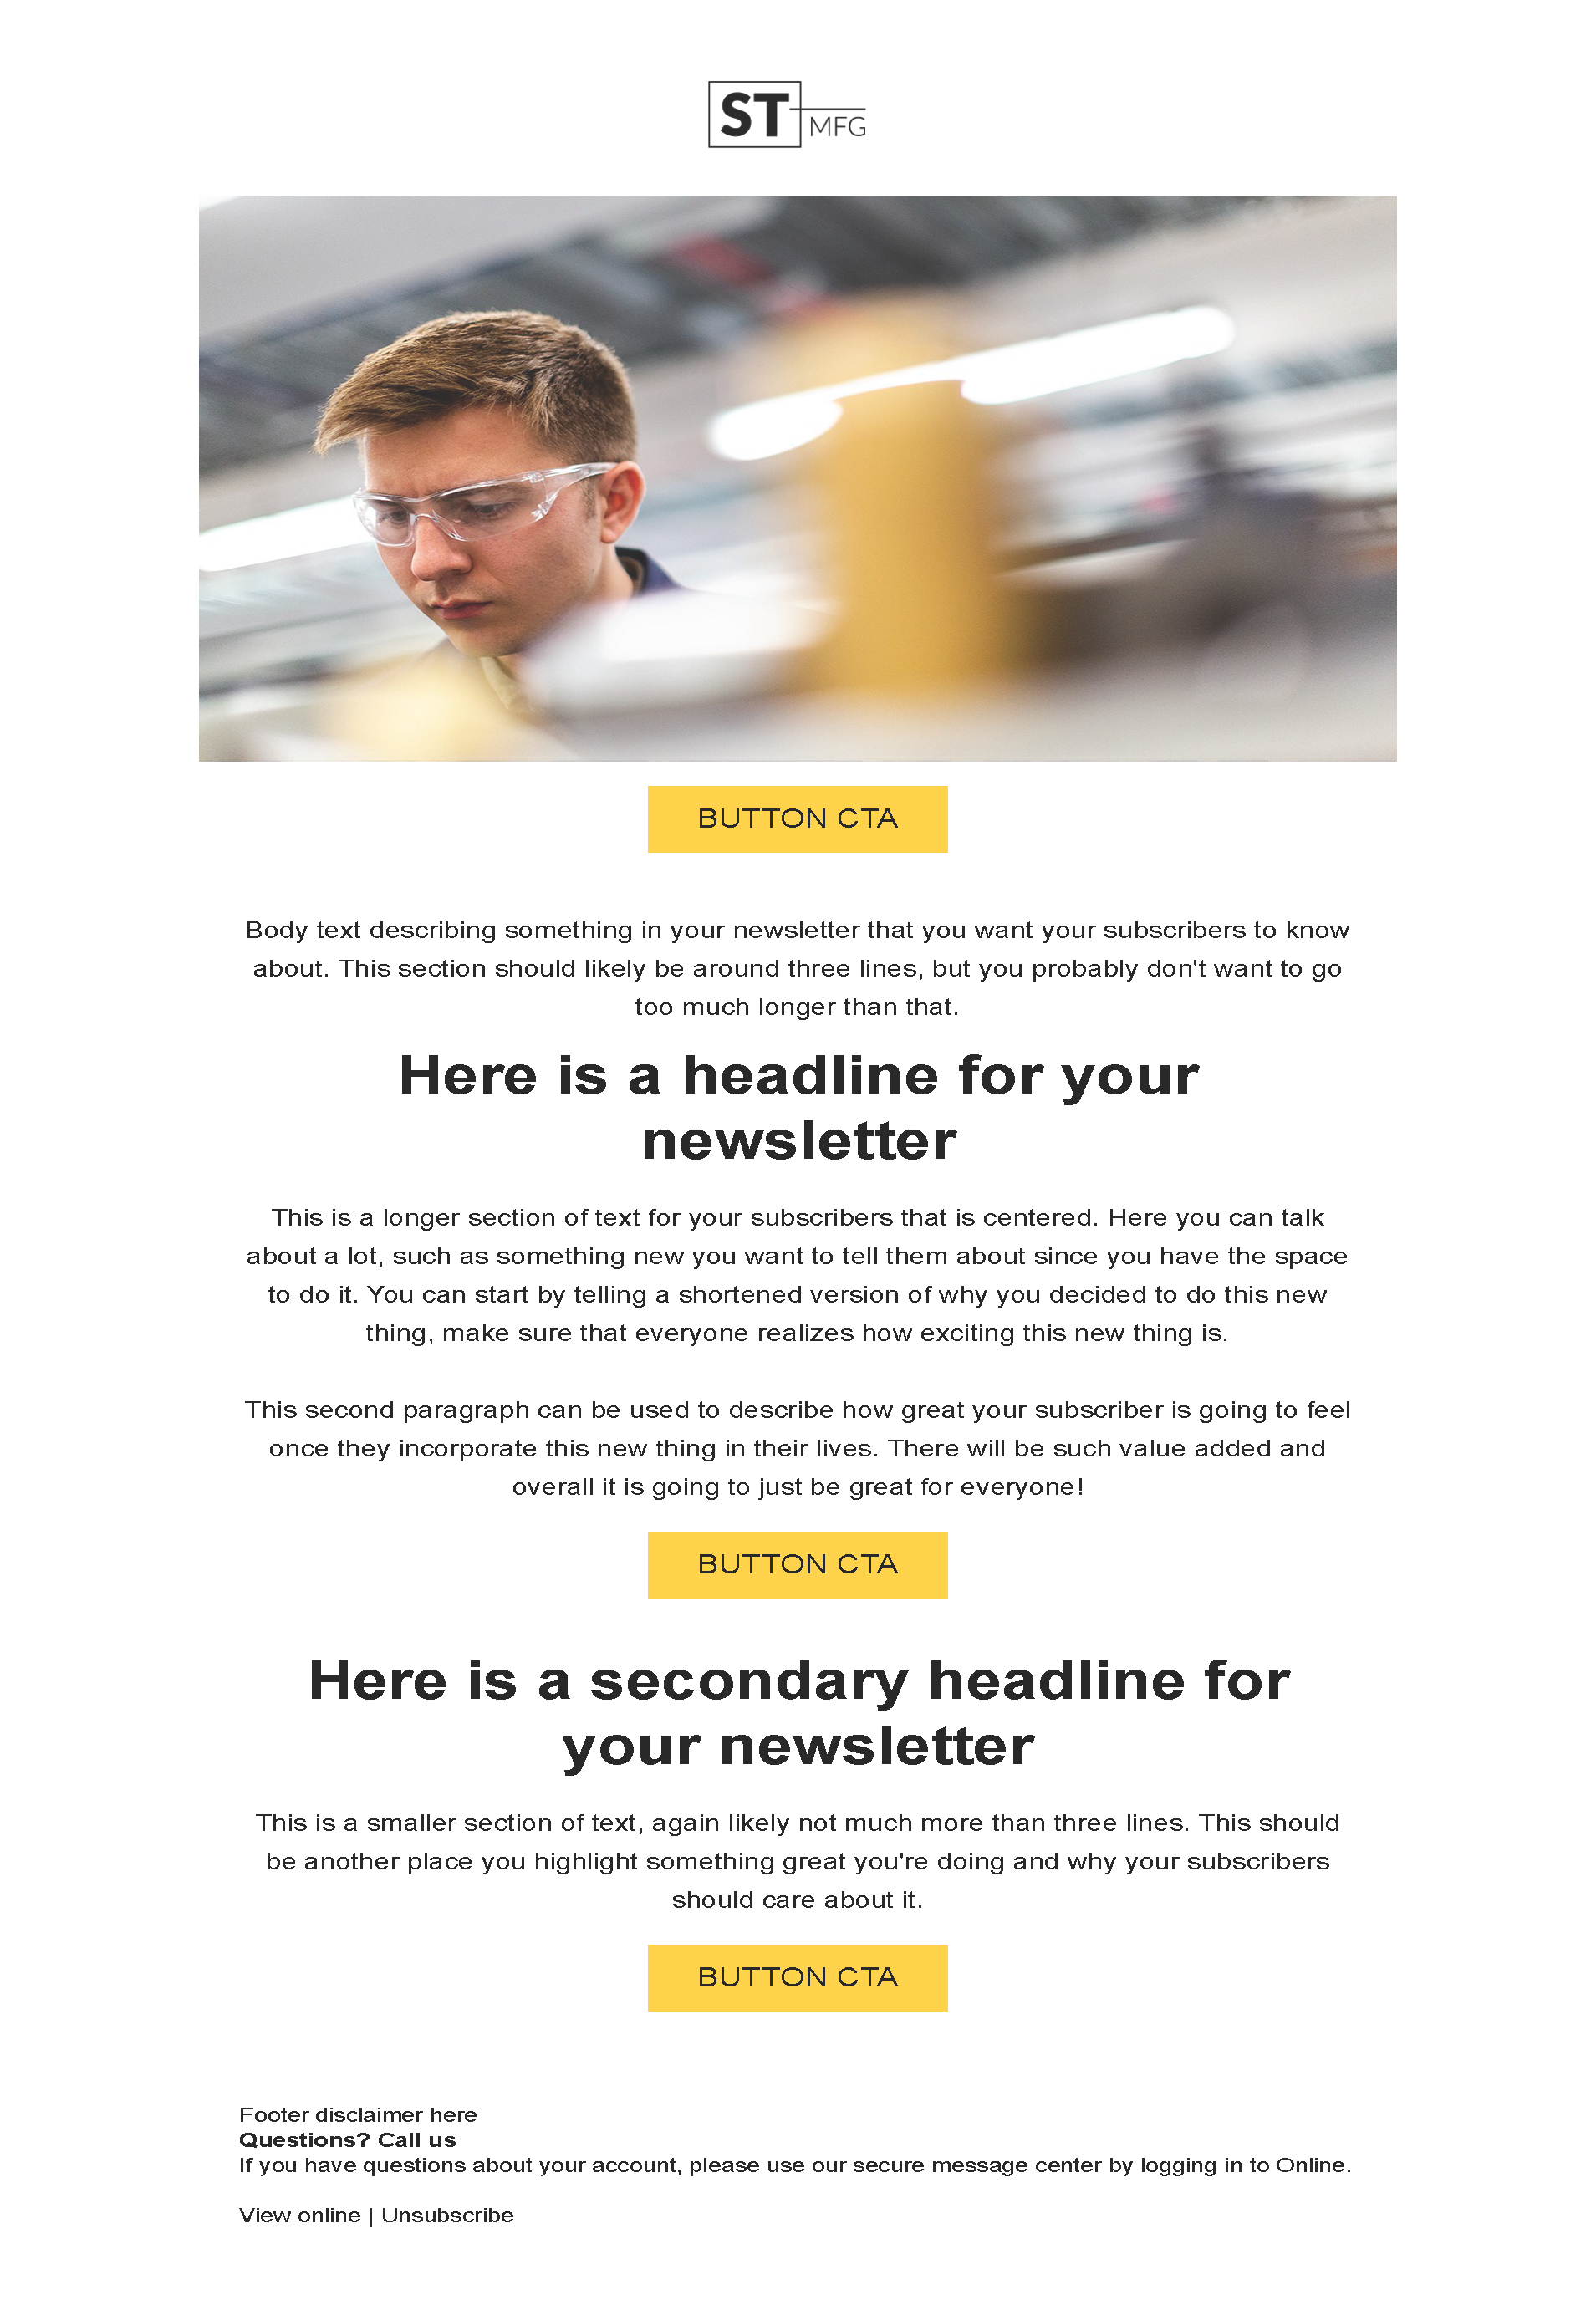 Newsletter email template 2 for manufacturing companies